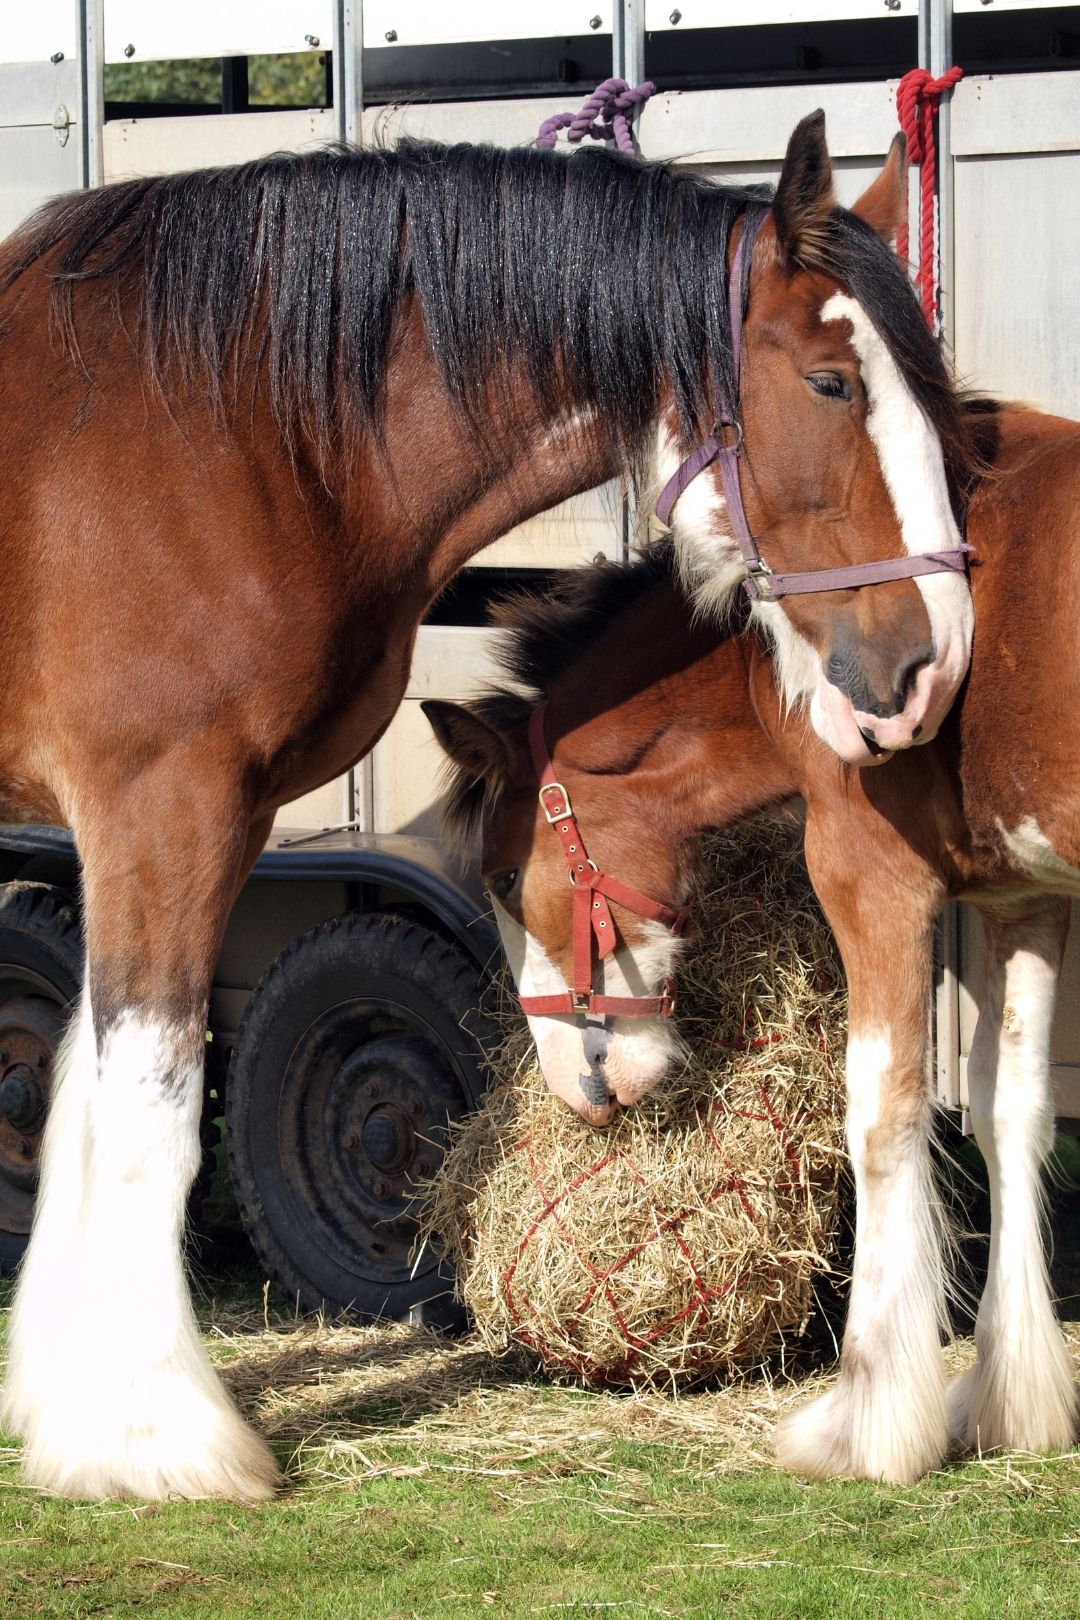 An adult Clydesdale horse and a baby eating hay